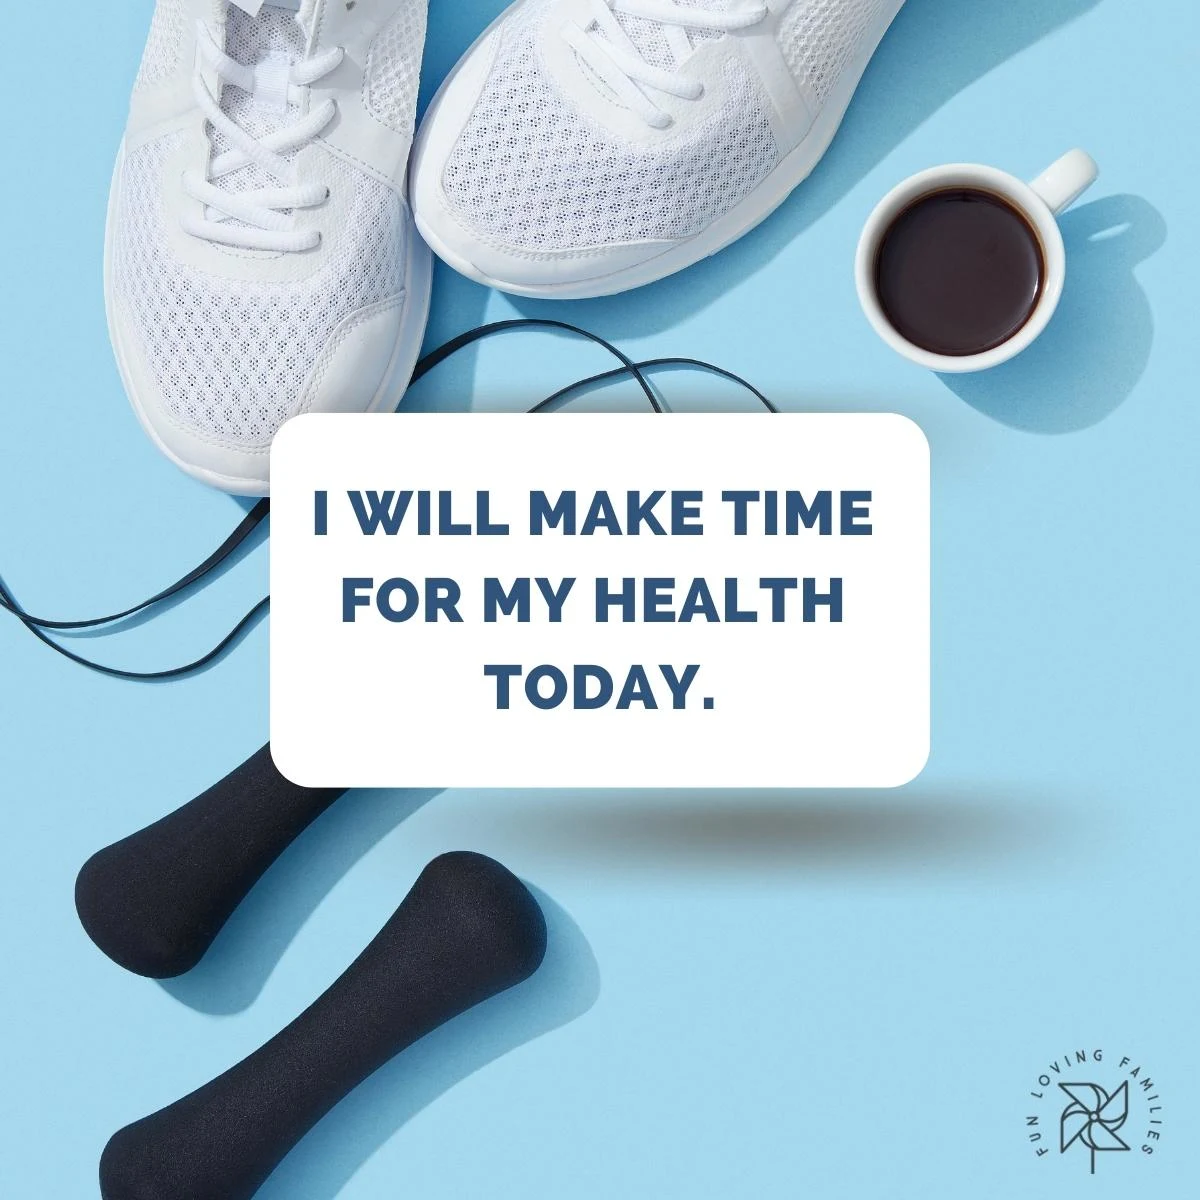 I will make time for my health today affirmation